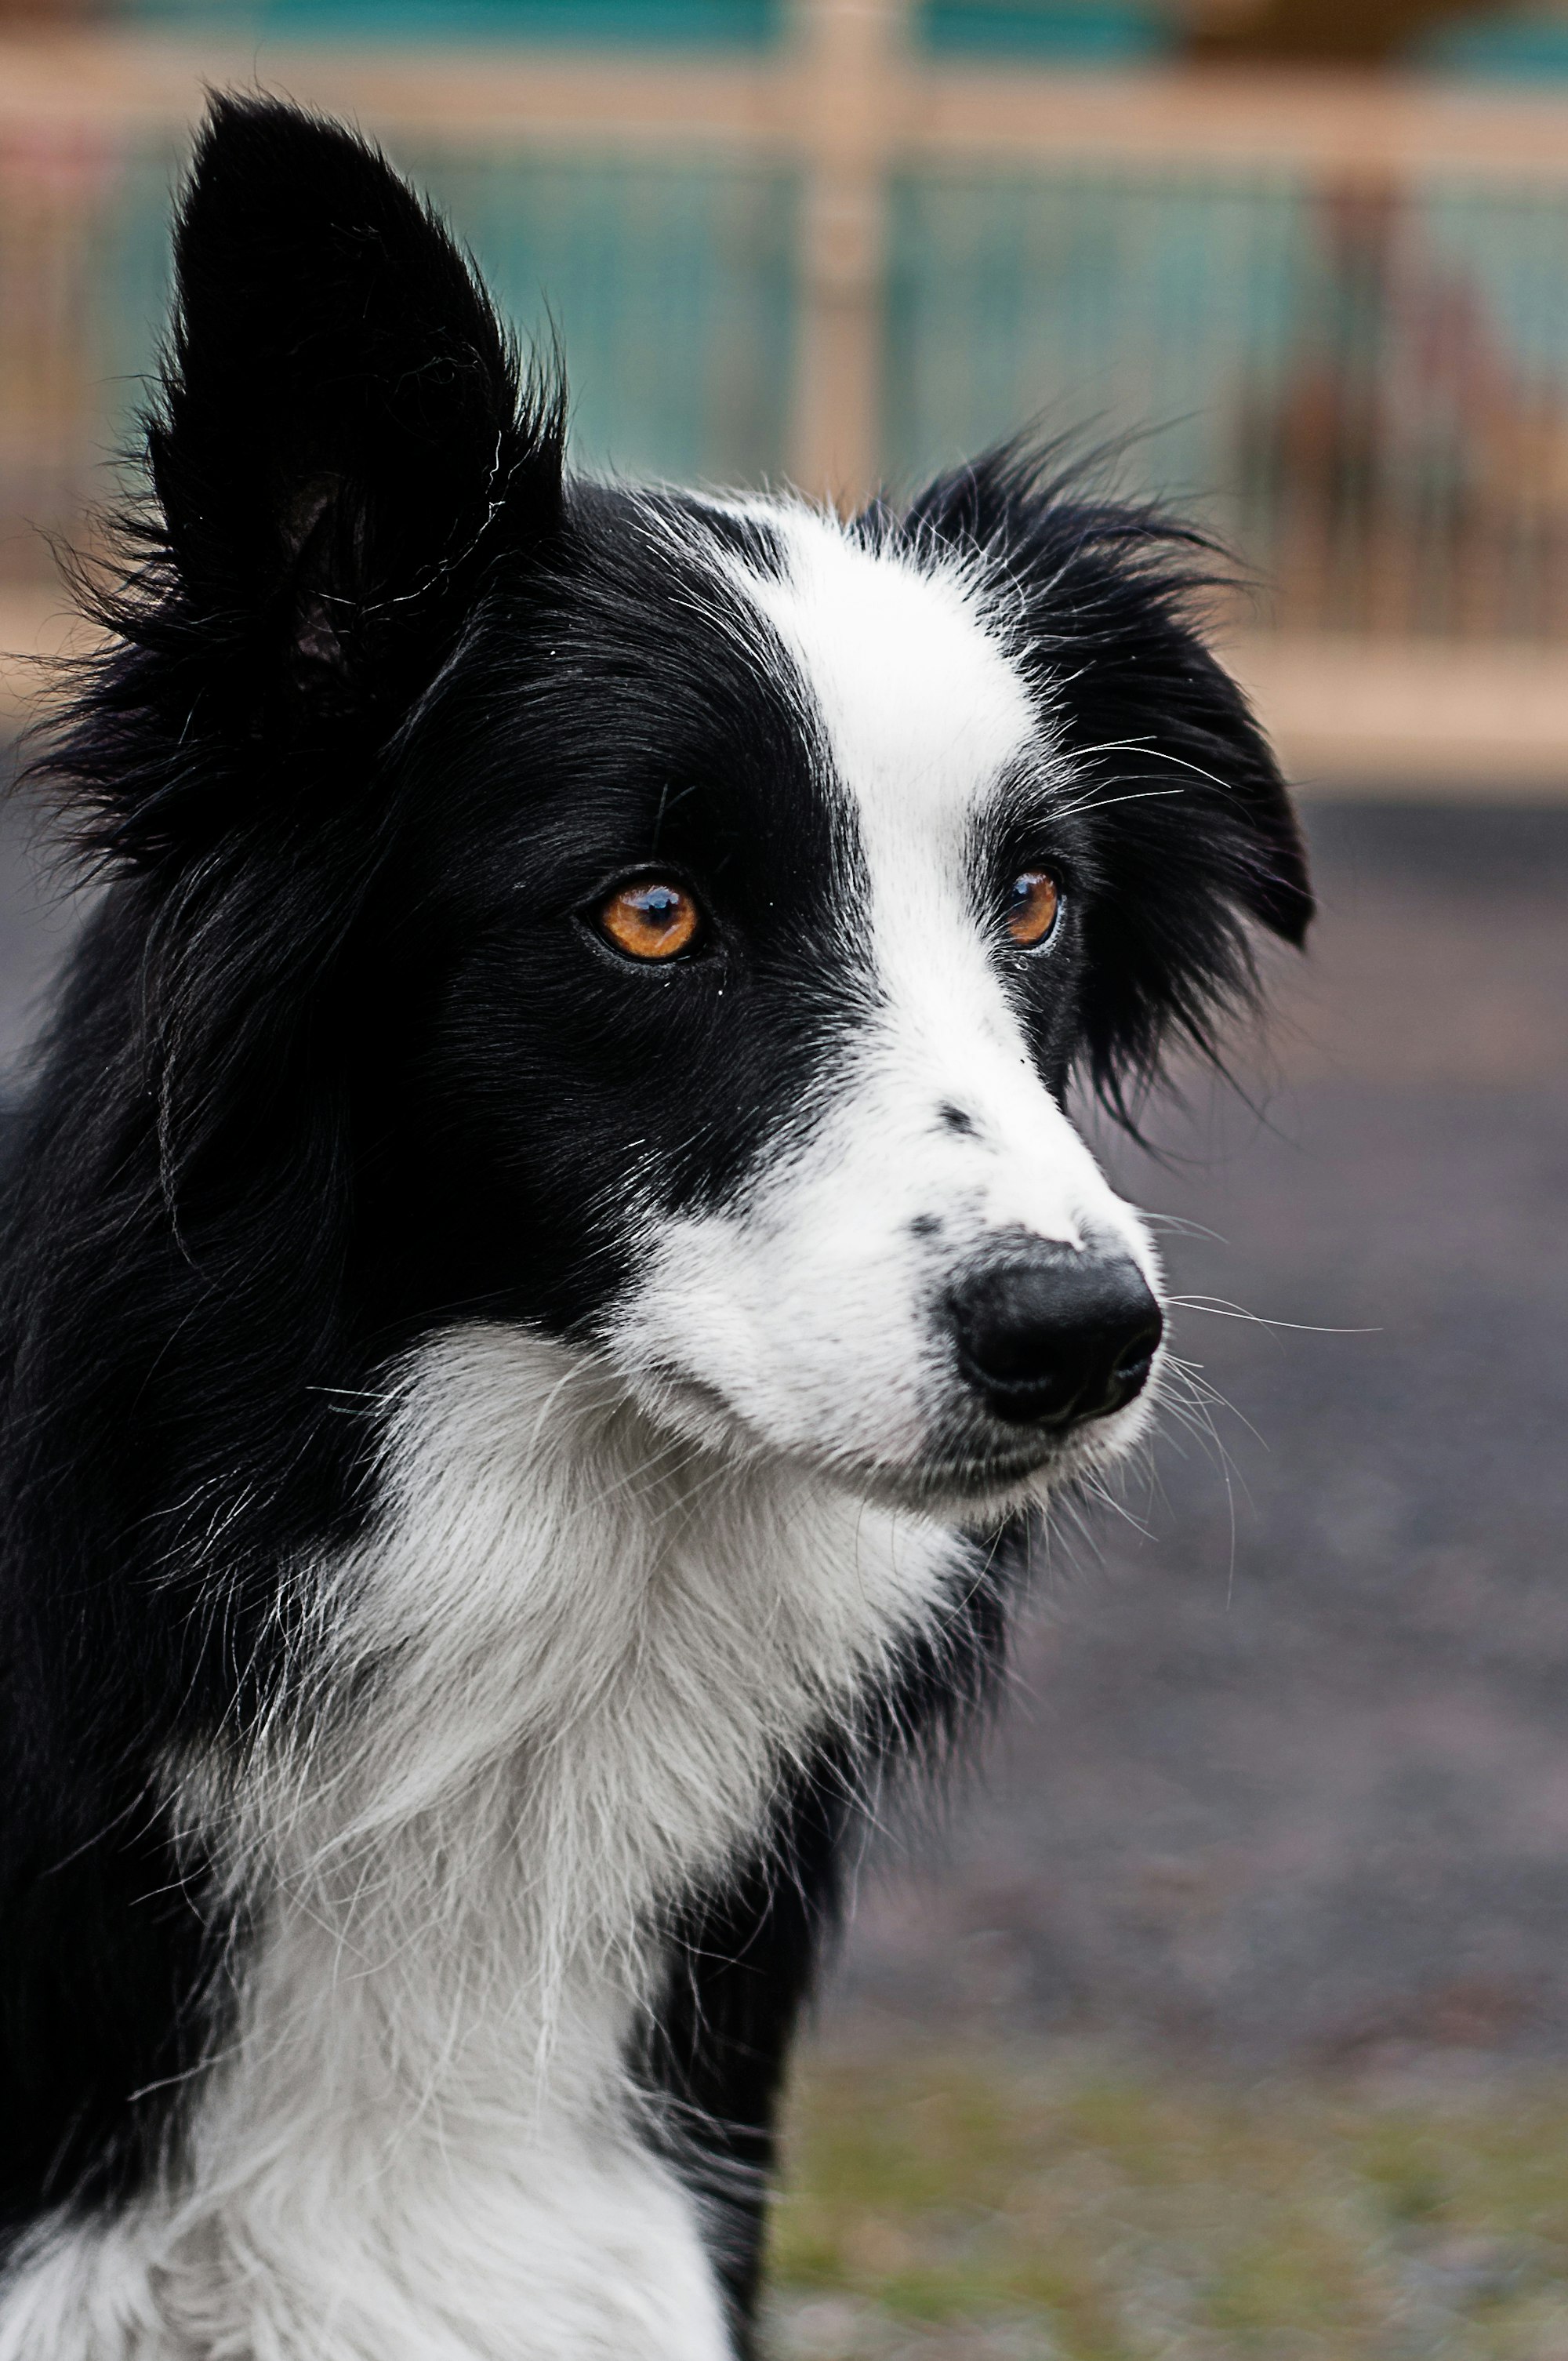 Can You Shave a Border Collie?